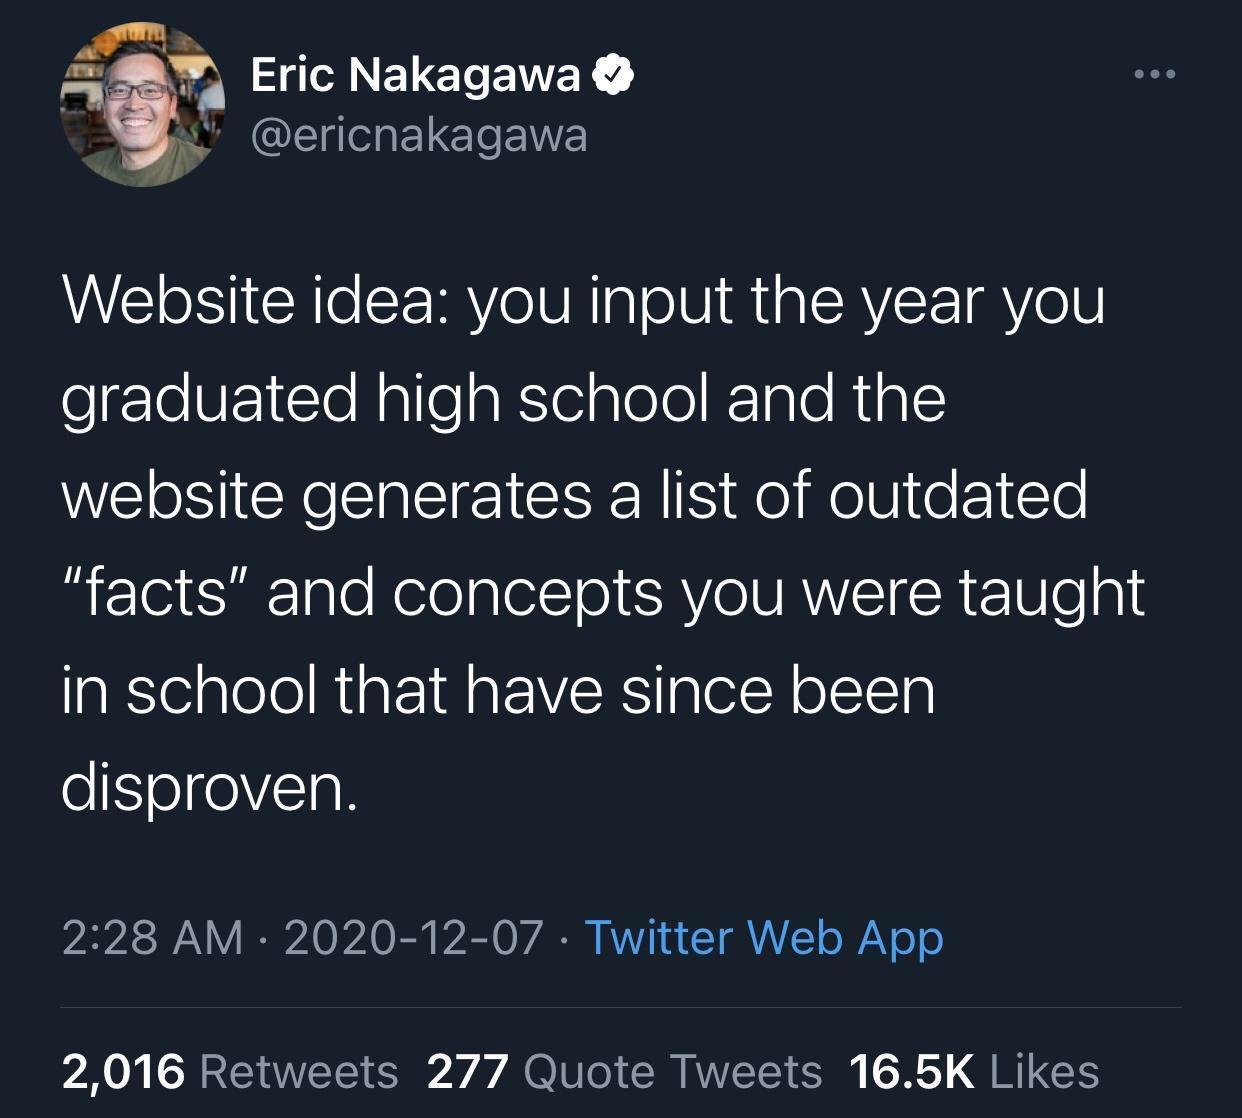 tweet about a website idea to search facts from when you were in high school based on specific years